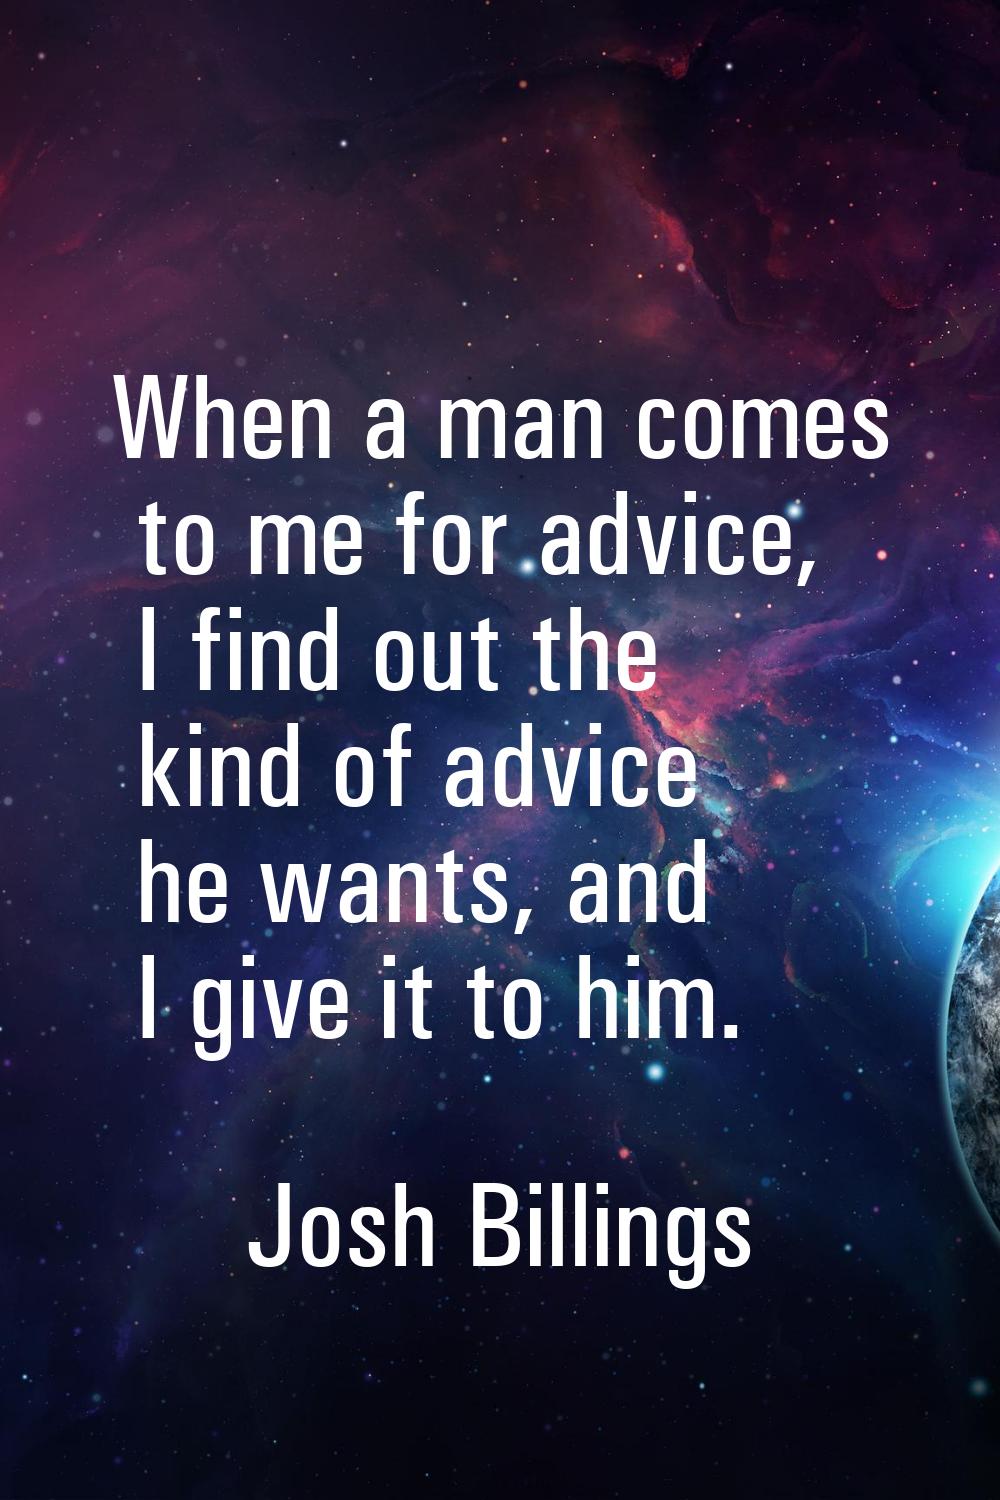 When a man comes to me for advice, I find out the kind of advice he wants, and I give it to him.